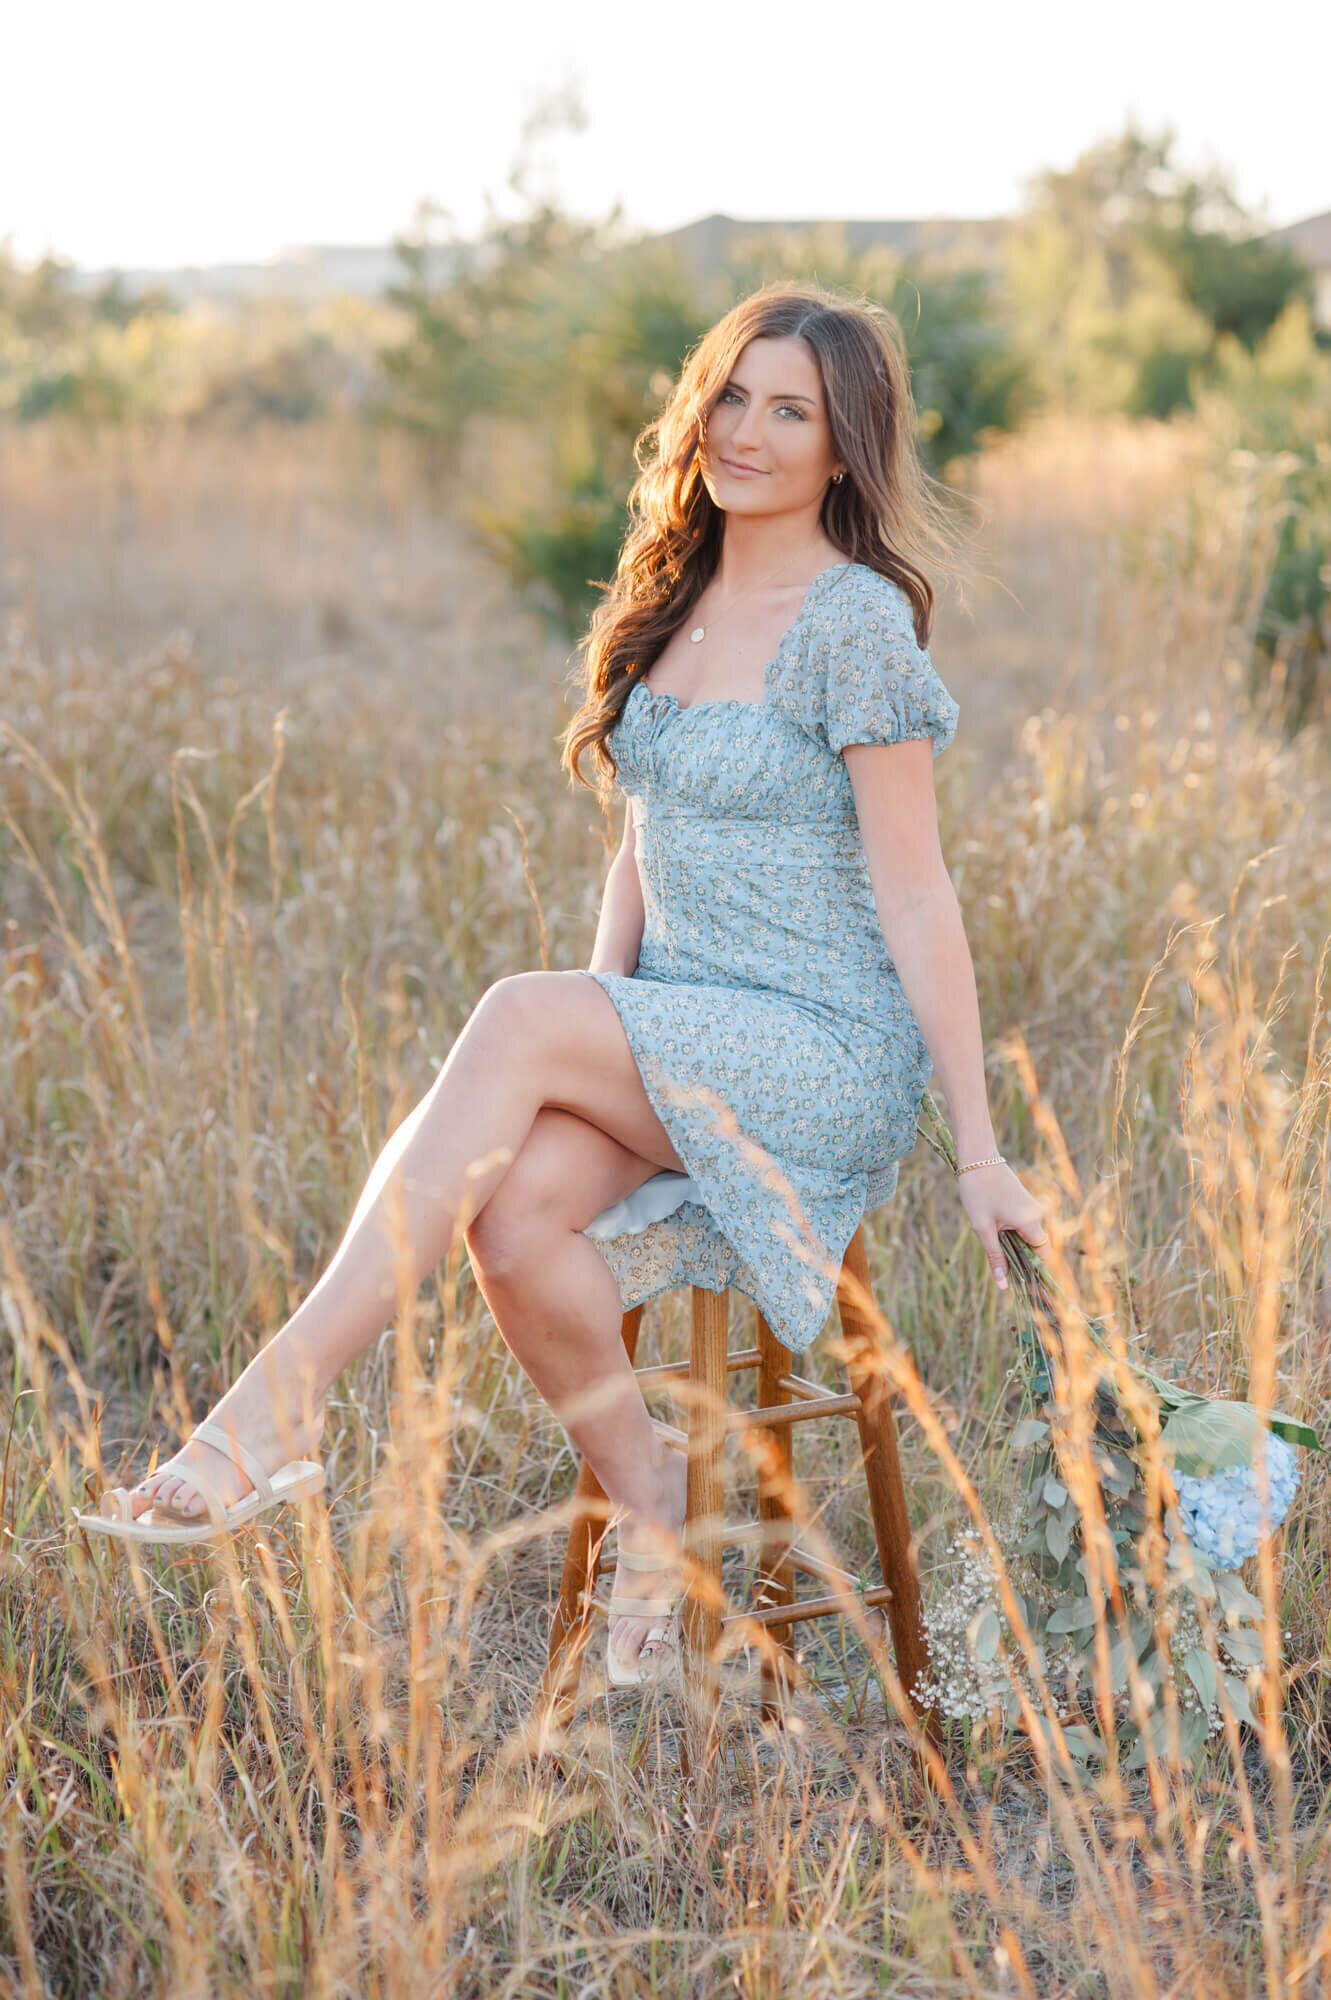 Stunning senior wearing a blue floral dress sitting in tall grass on a bar stool holding florals